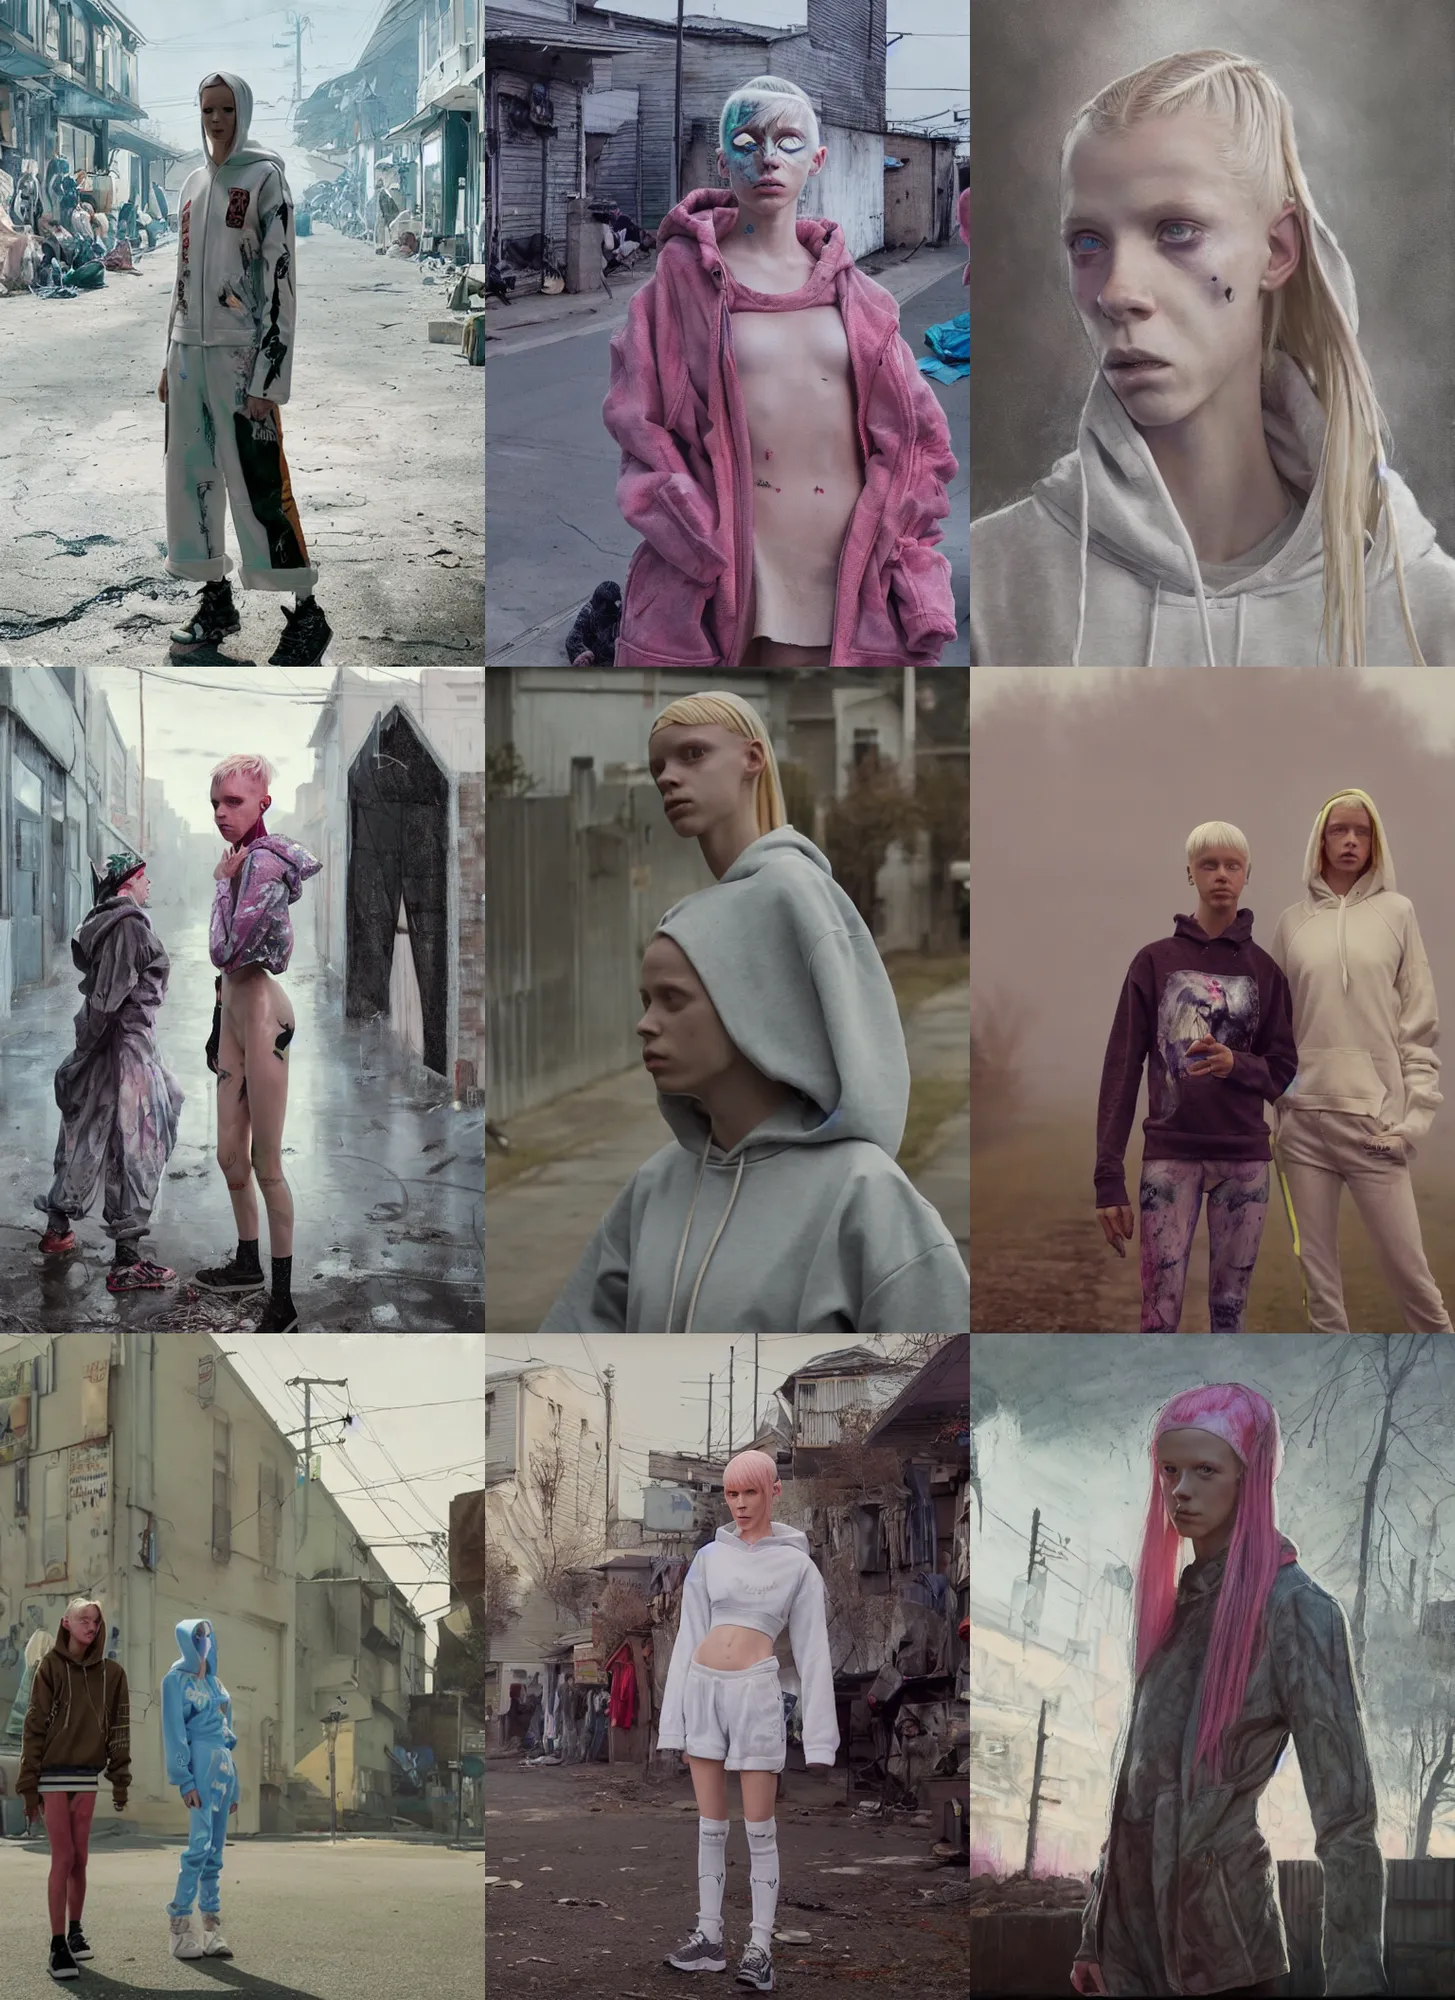 Prompt: still from music video of hunter schafer from die antwoord standing in a township street, wearing a hoodie, street clothes, full figure portrait painting by martine johanna, craig mullins, wadim kashin, pastel color palette, 2 4 mm lens